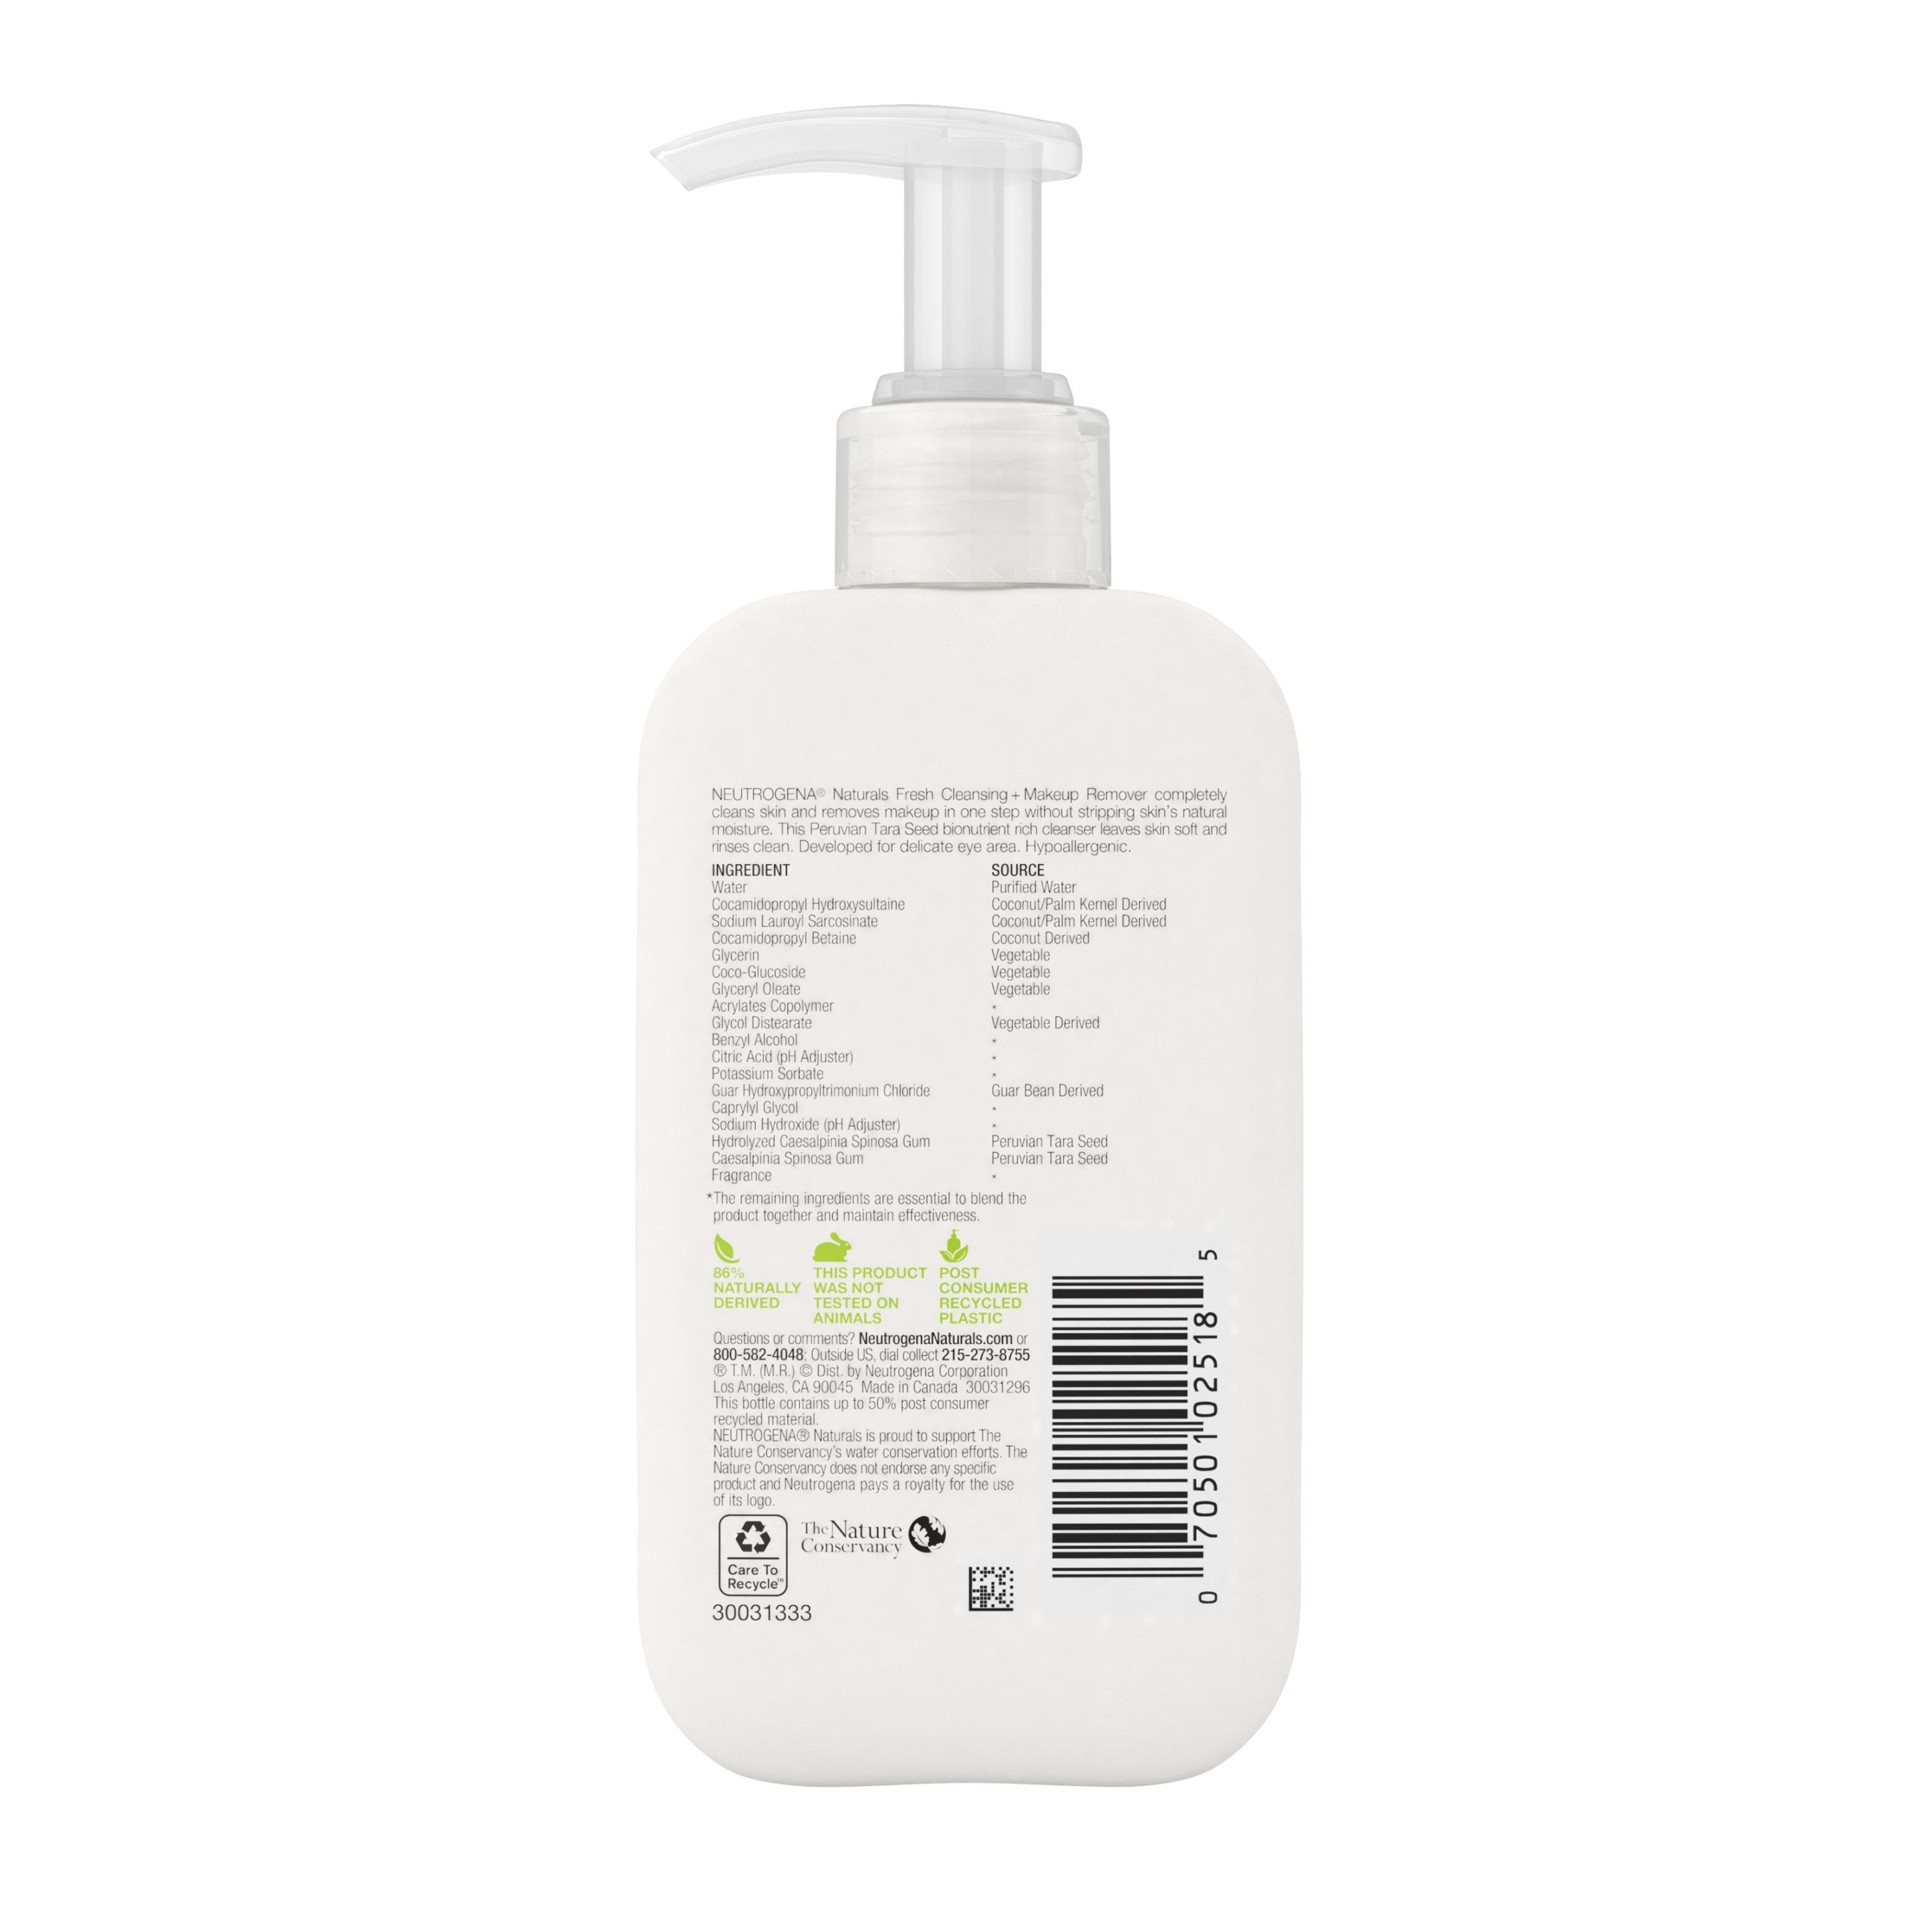 slide 3 of 5, Neutrogena Naturals Fresh Cleansing Daily Face Wash + Makeup Remover with Naturally-Derived Peruvian Tara Seed, Hypoallergenic, Non-Comedogenic & Sulfate-, Paraben- & Phthalate-Free, 6 fl. oz, 6 fl oz